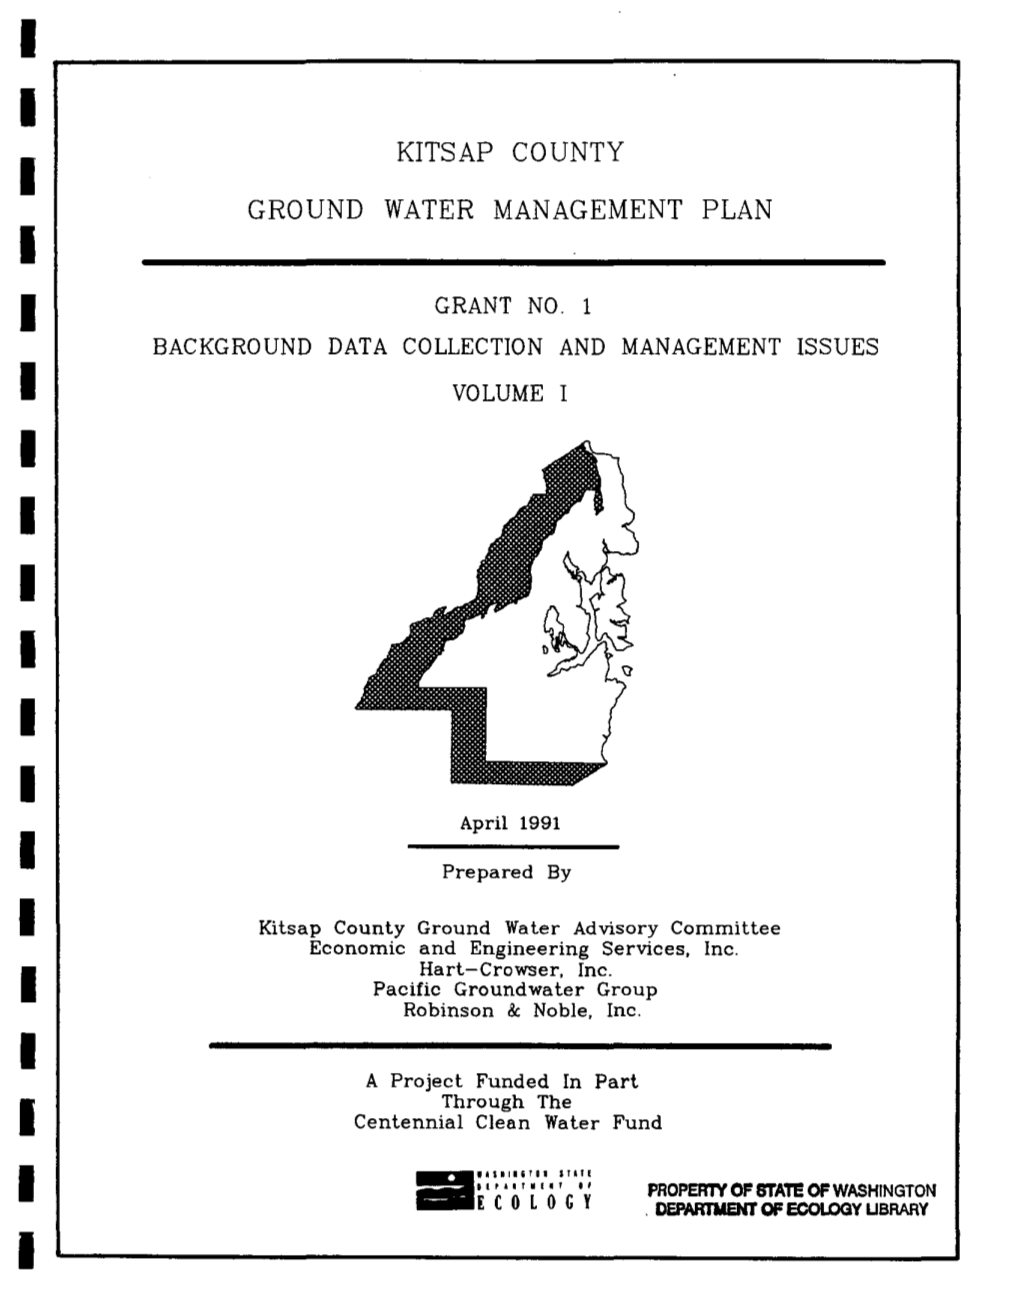 Kitsap County GWM Plan, Background Data Collection and Management Issues Volume I